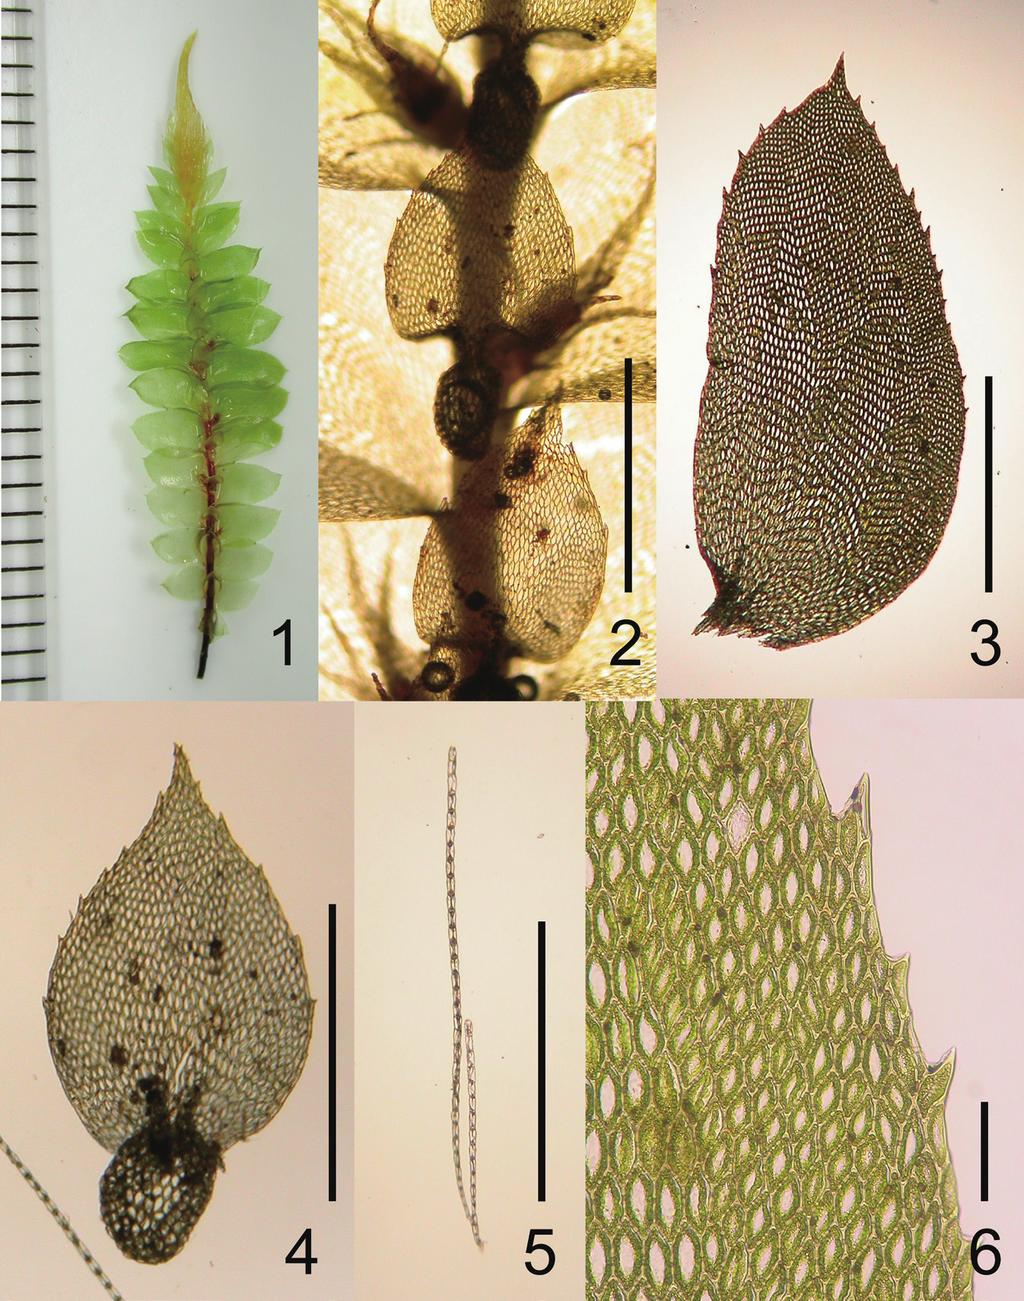 Bryophyte Flora of Vanuatu. 12. Hypnodendraceae and Hypopterygiaceae 41 Fig. 1. Cyathophorum tahitense. 1. Plant. 2. A part of plant. 3. Leaf. 4. Amphigastrim having sac-like structure, named as pouch, at the base.